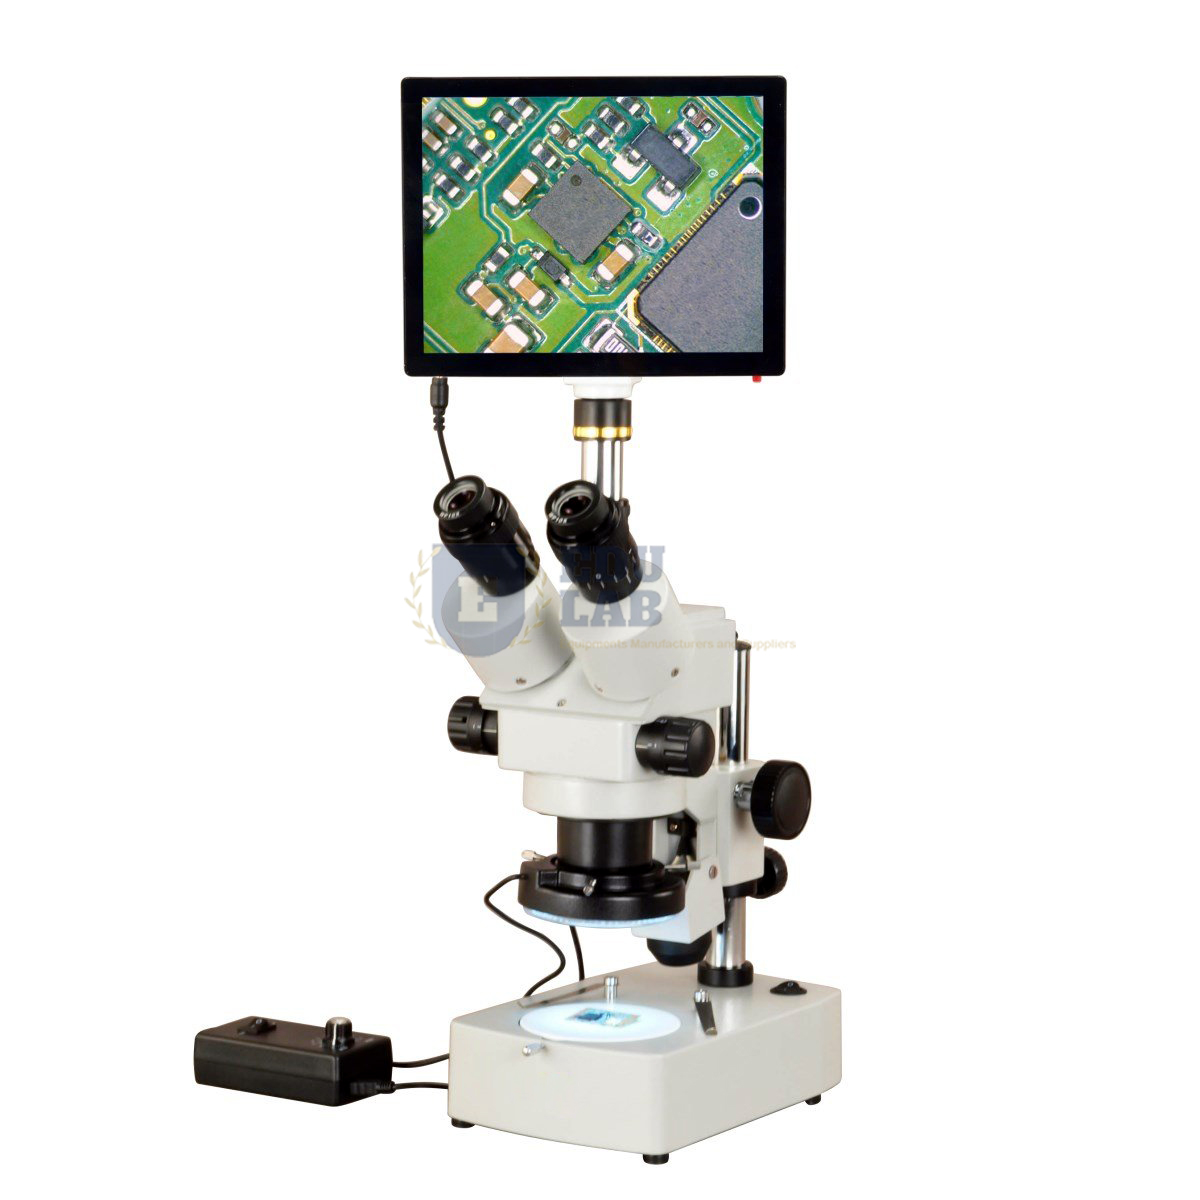 LCD Touch Pad Stereo Zoom Trinocular Microscope